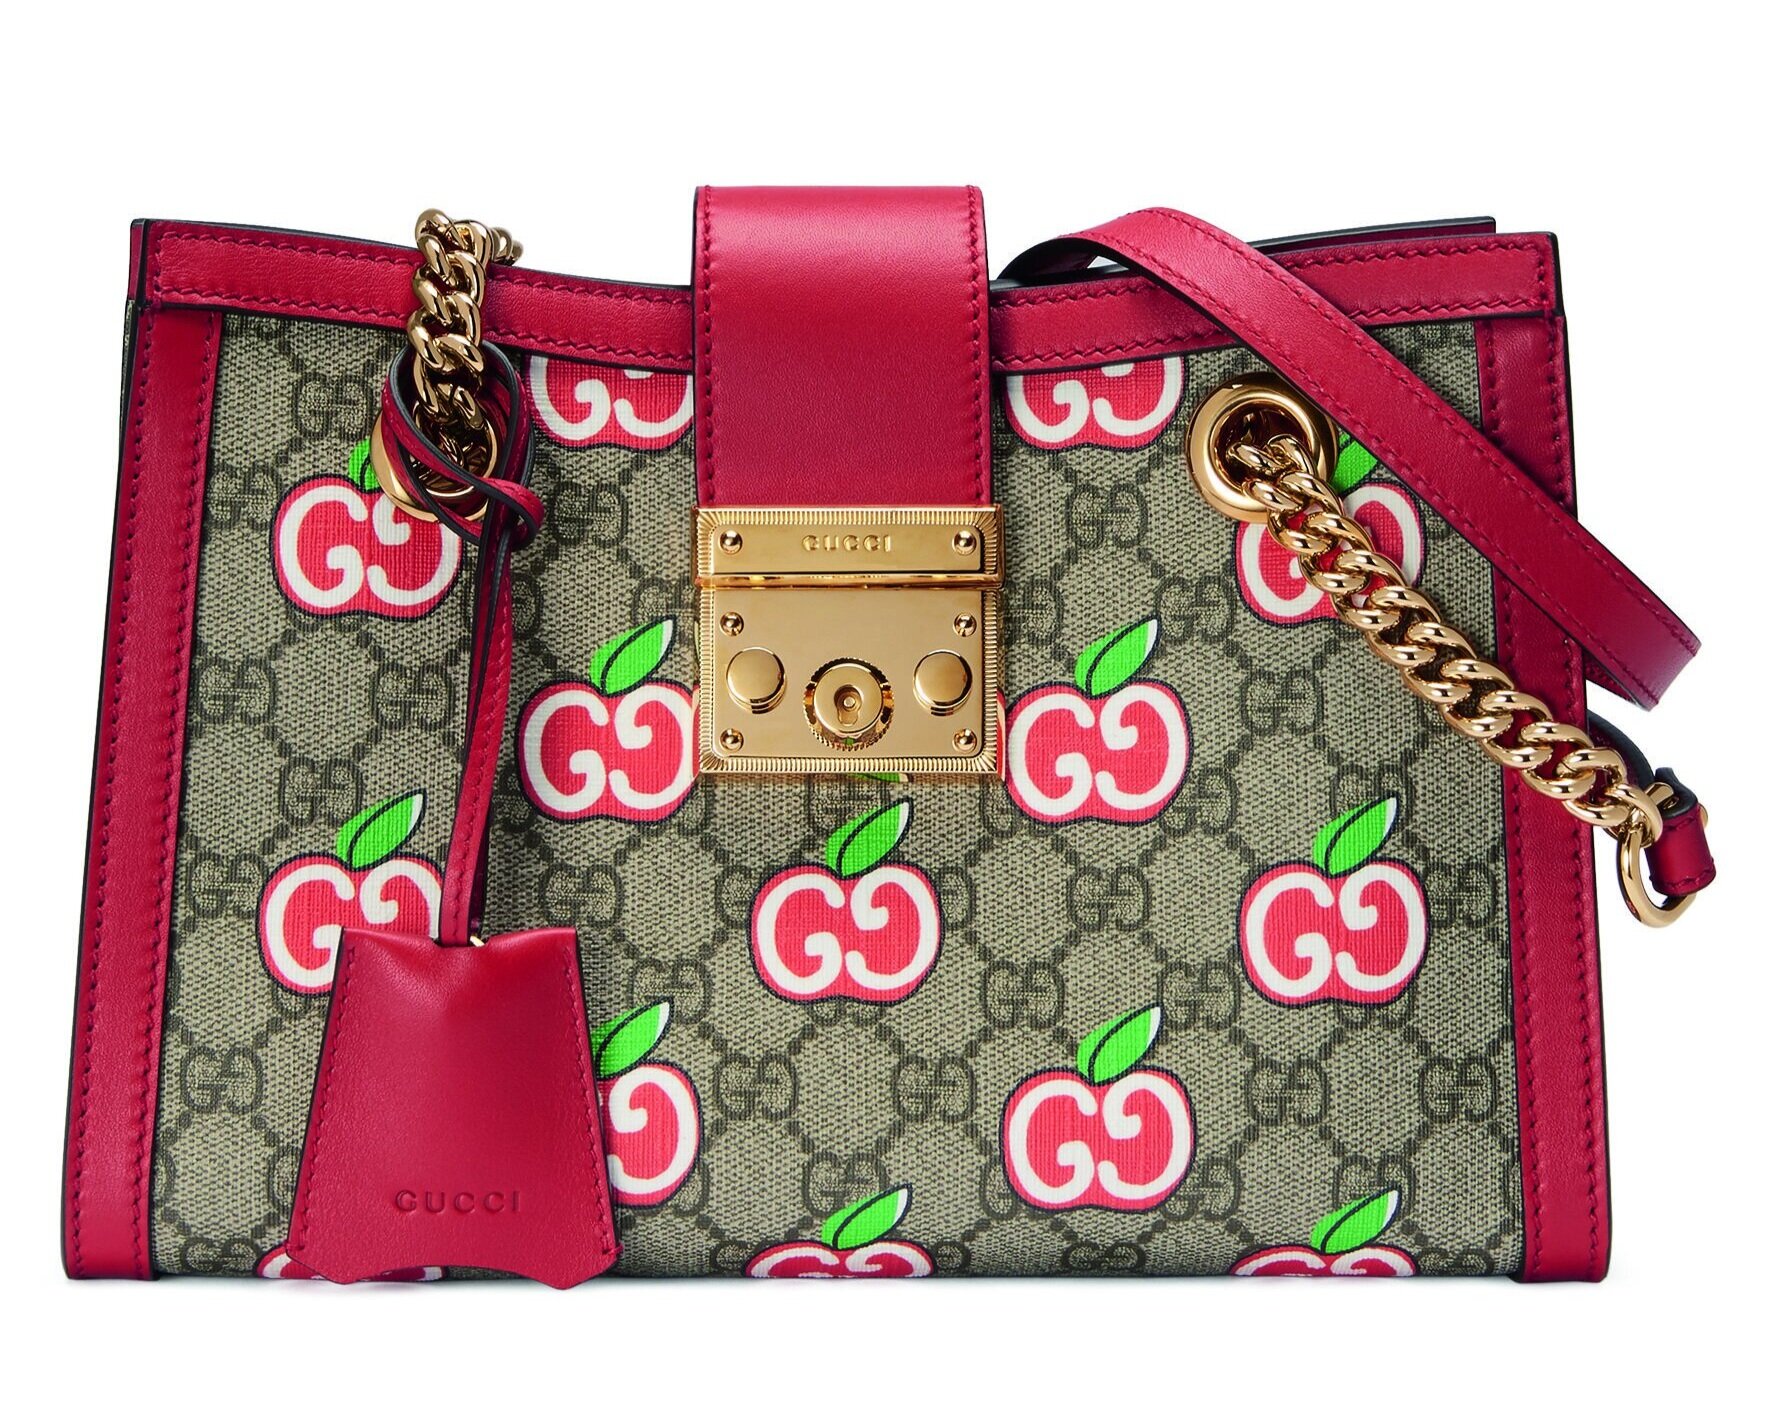 Celebrate Qixi Festival With Louis Vuitton, Prada, Gucci and Many More